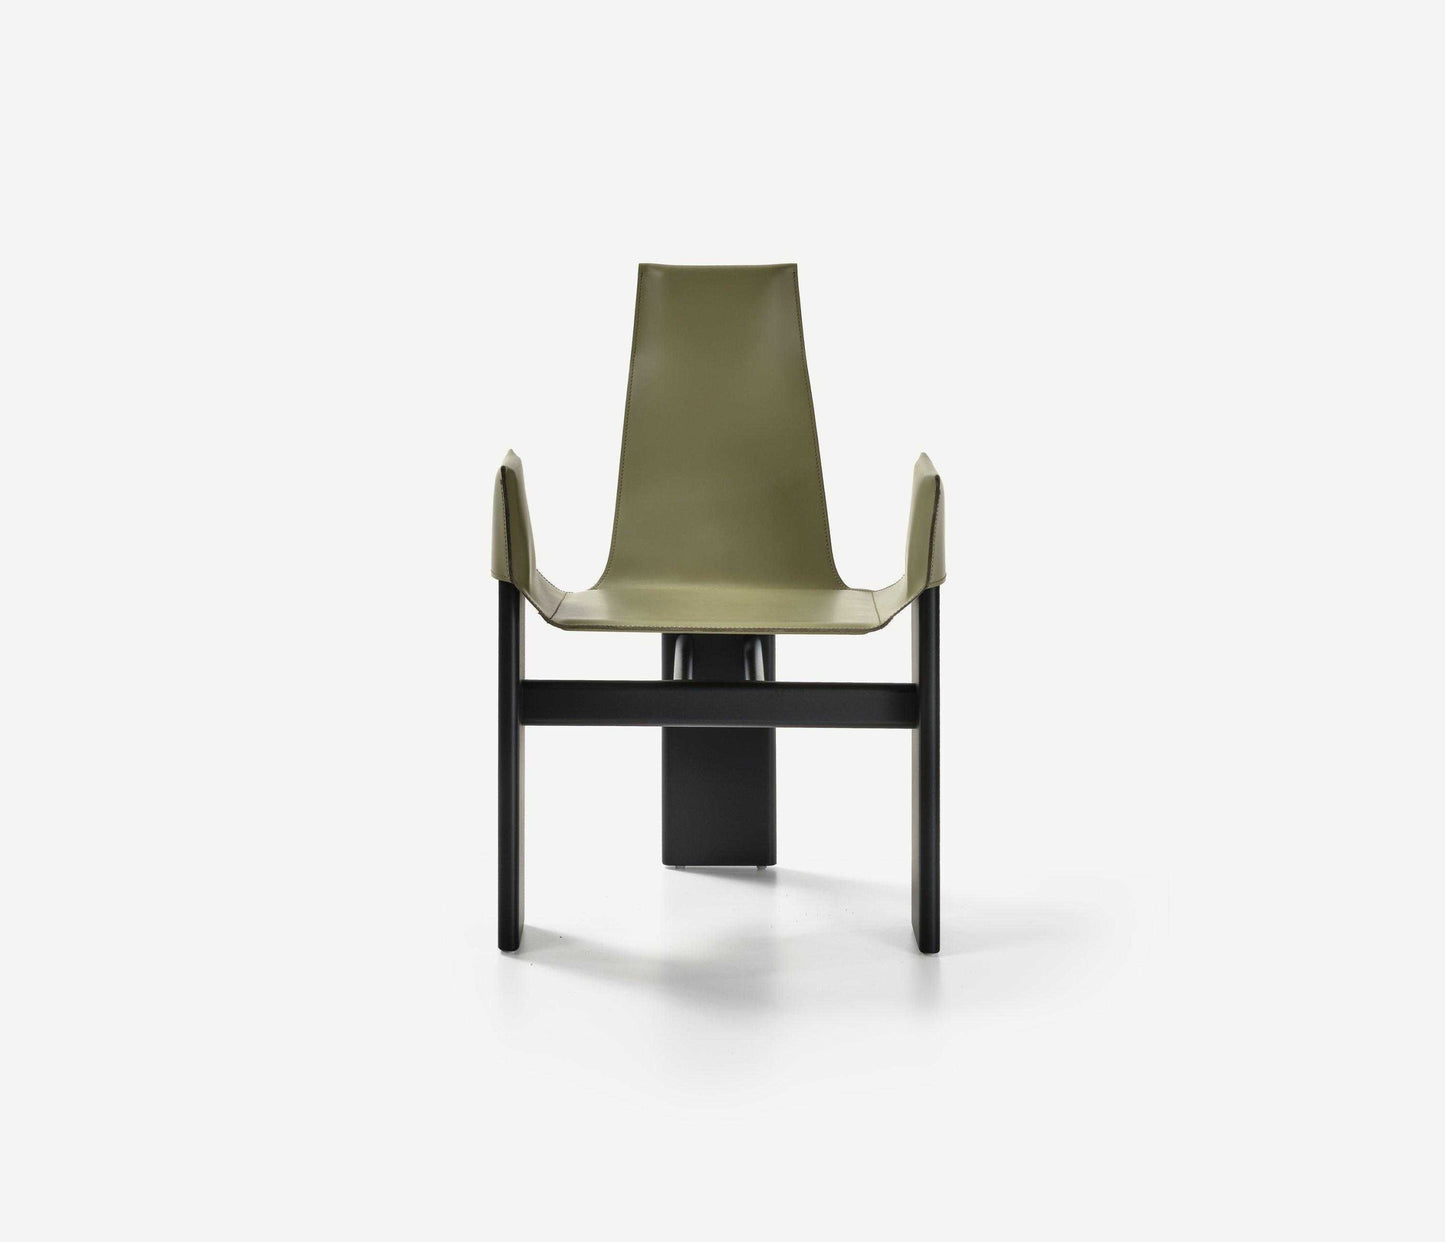 MANTA I chair by NATUREDESIGN